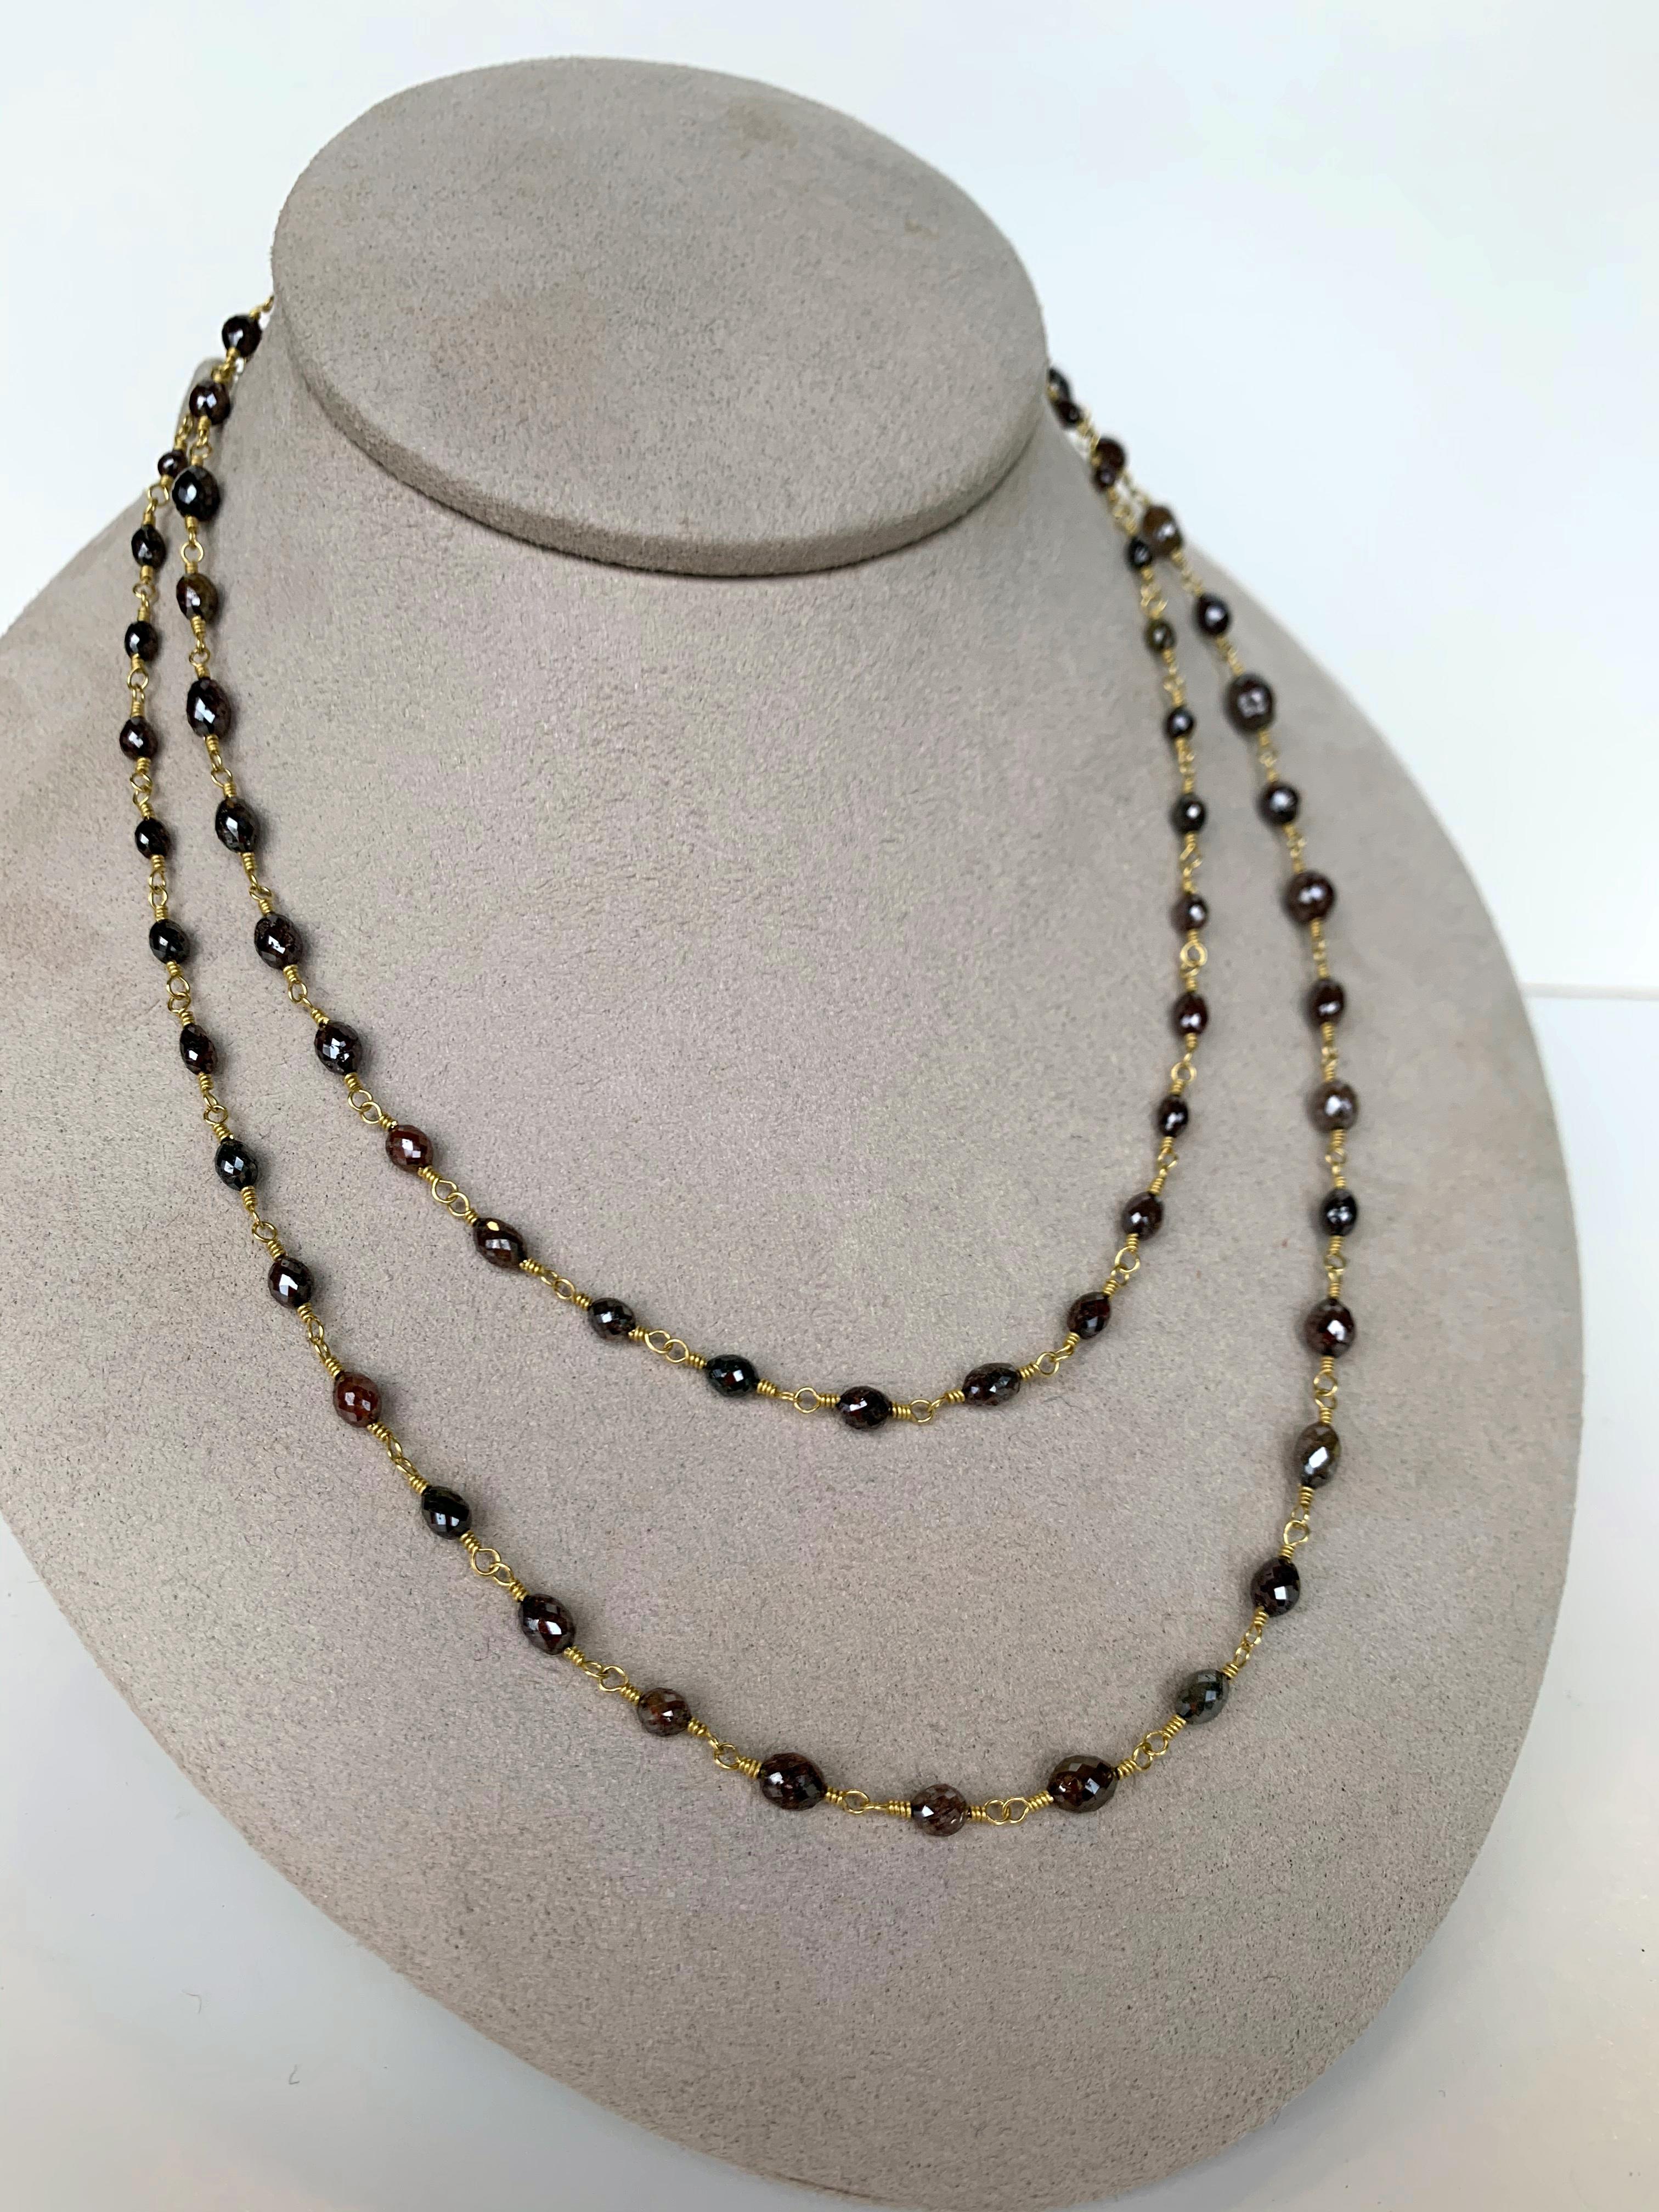 Faceted oval diamond beads weighing 49 carats in subtle shades of 